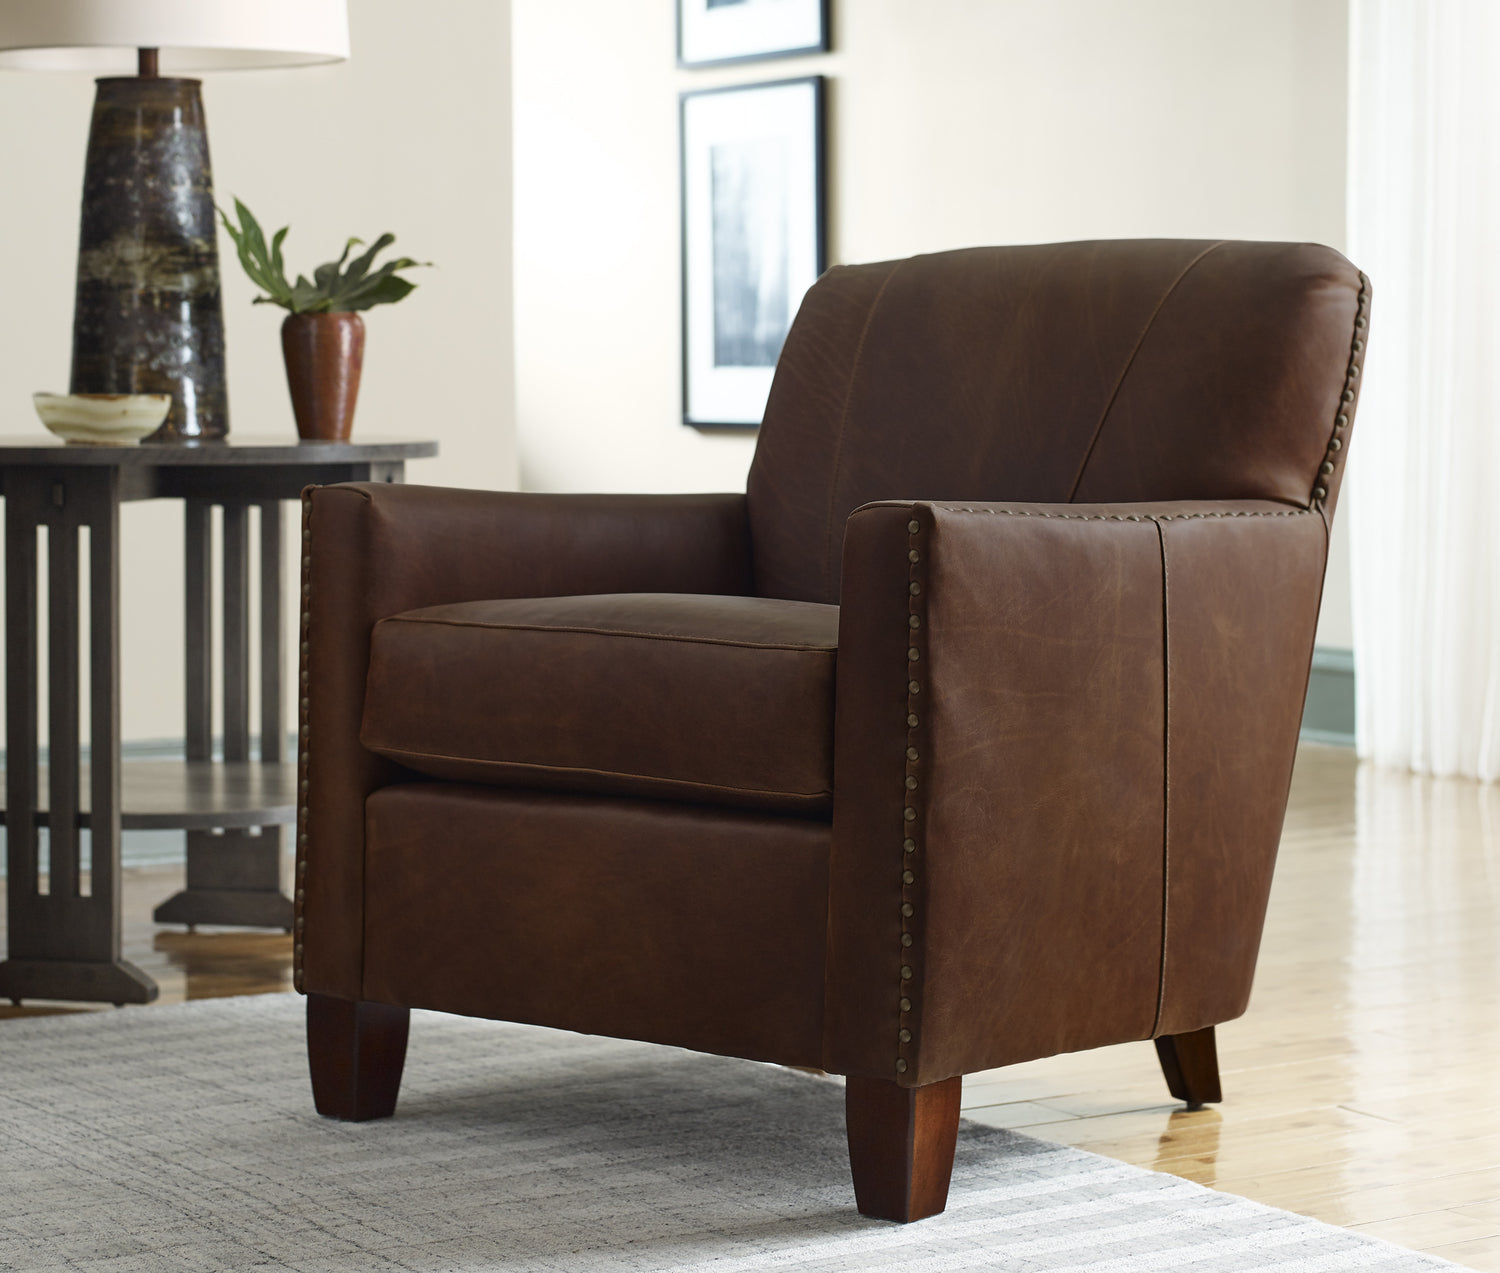 Lifestyle of a dark brown leather Santa Cruz Club Chair sitting in a white room filled with natural sunlight from the window. There is an end table next to it in the background with a tall black table lamp on top of it as well as a small brown vase.